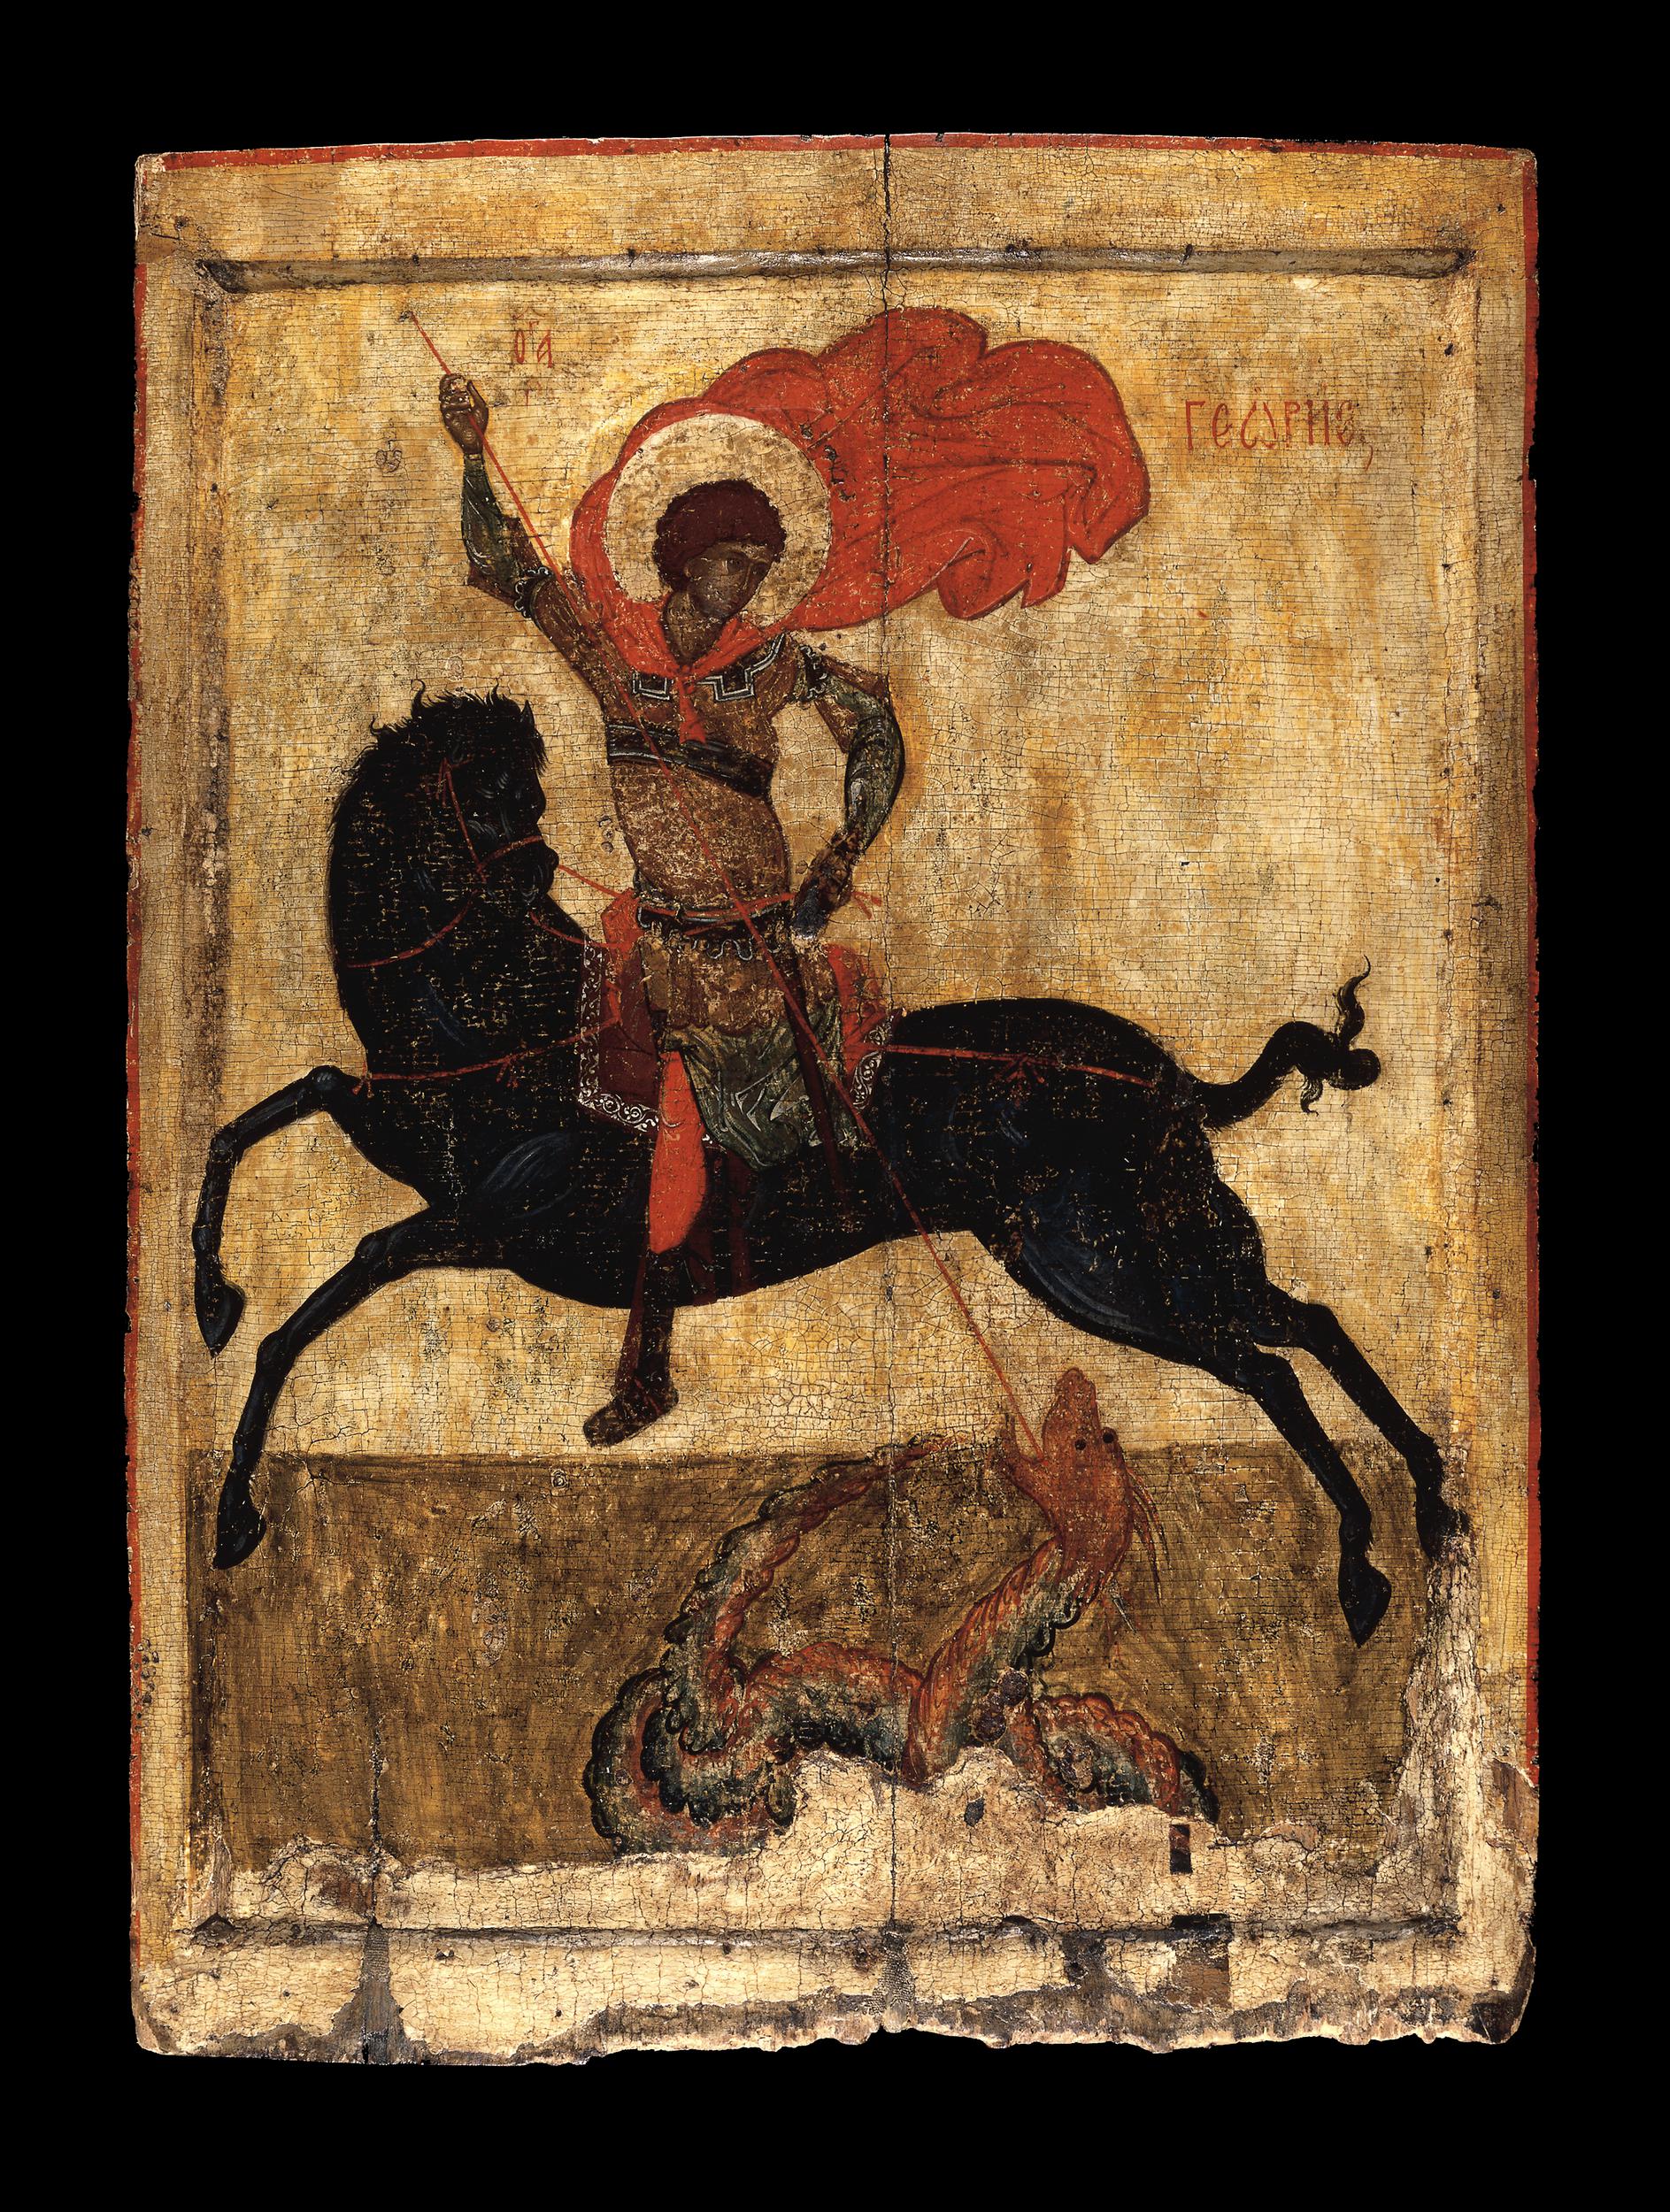 Icon of St. George and the Dragon 1400–50 Wood, gesso, gold Novgorod © The Trustees of the British Museum